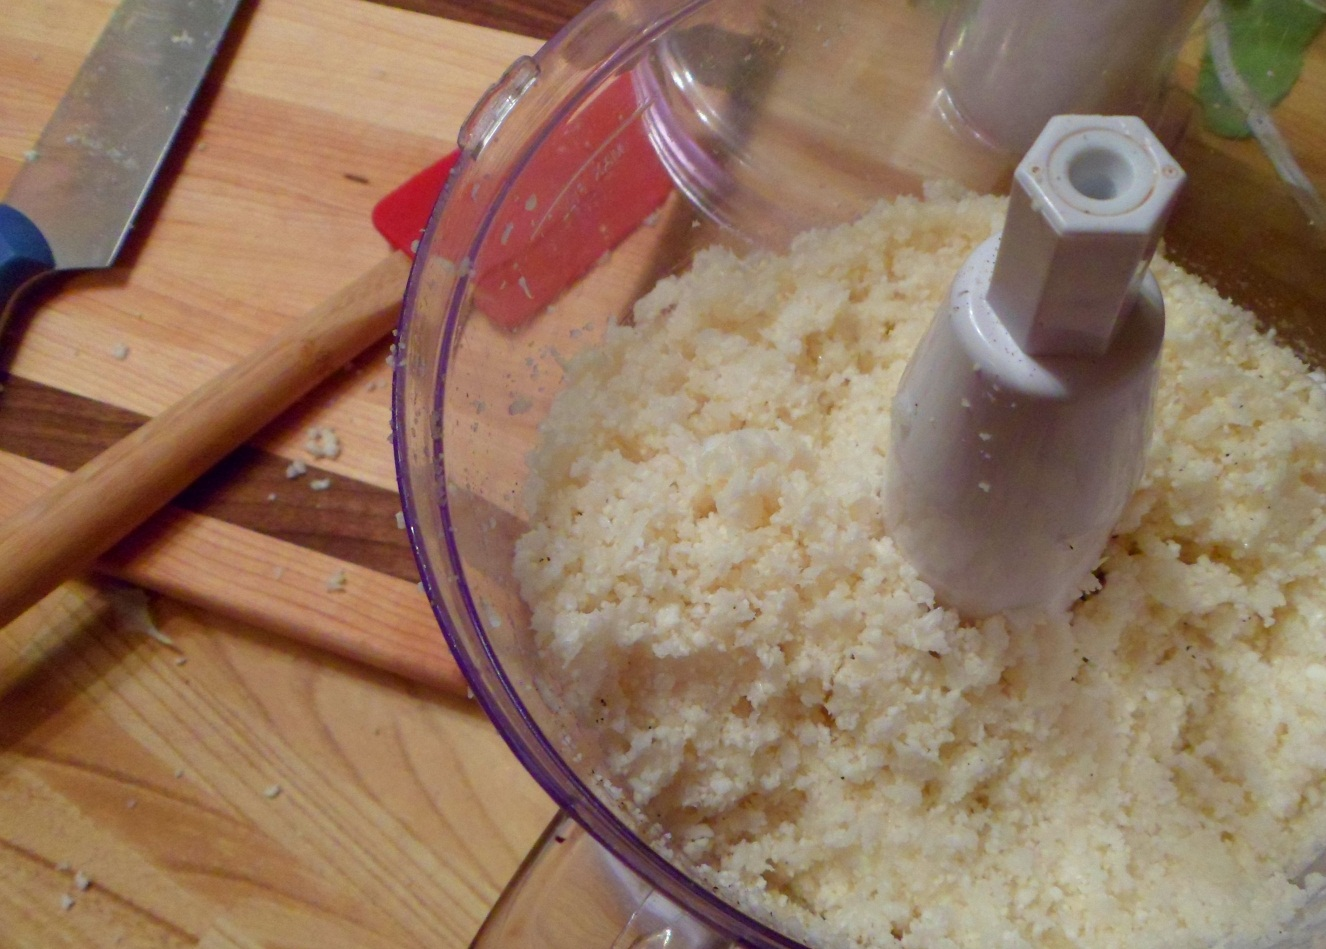 Cauliflower after food processing. Use a regular box grater if you don't have a food processor.